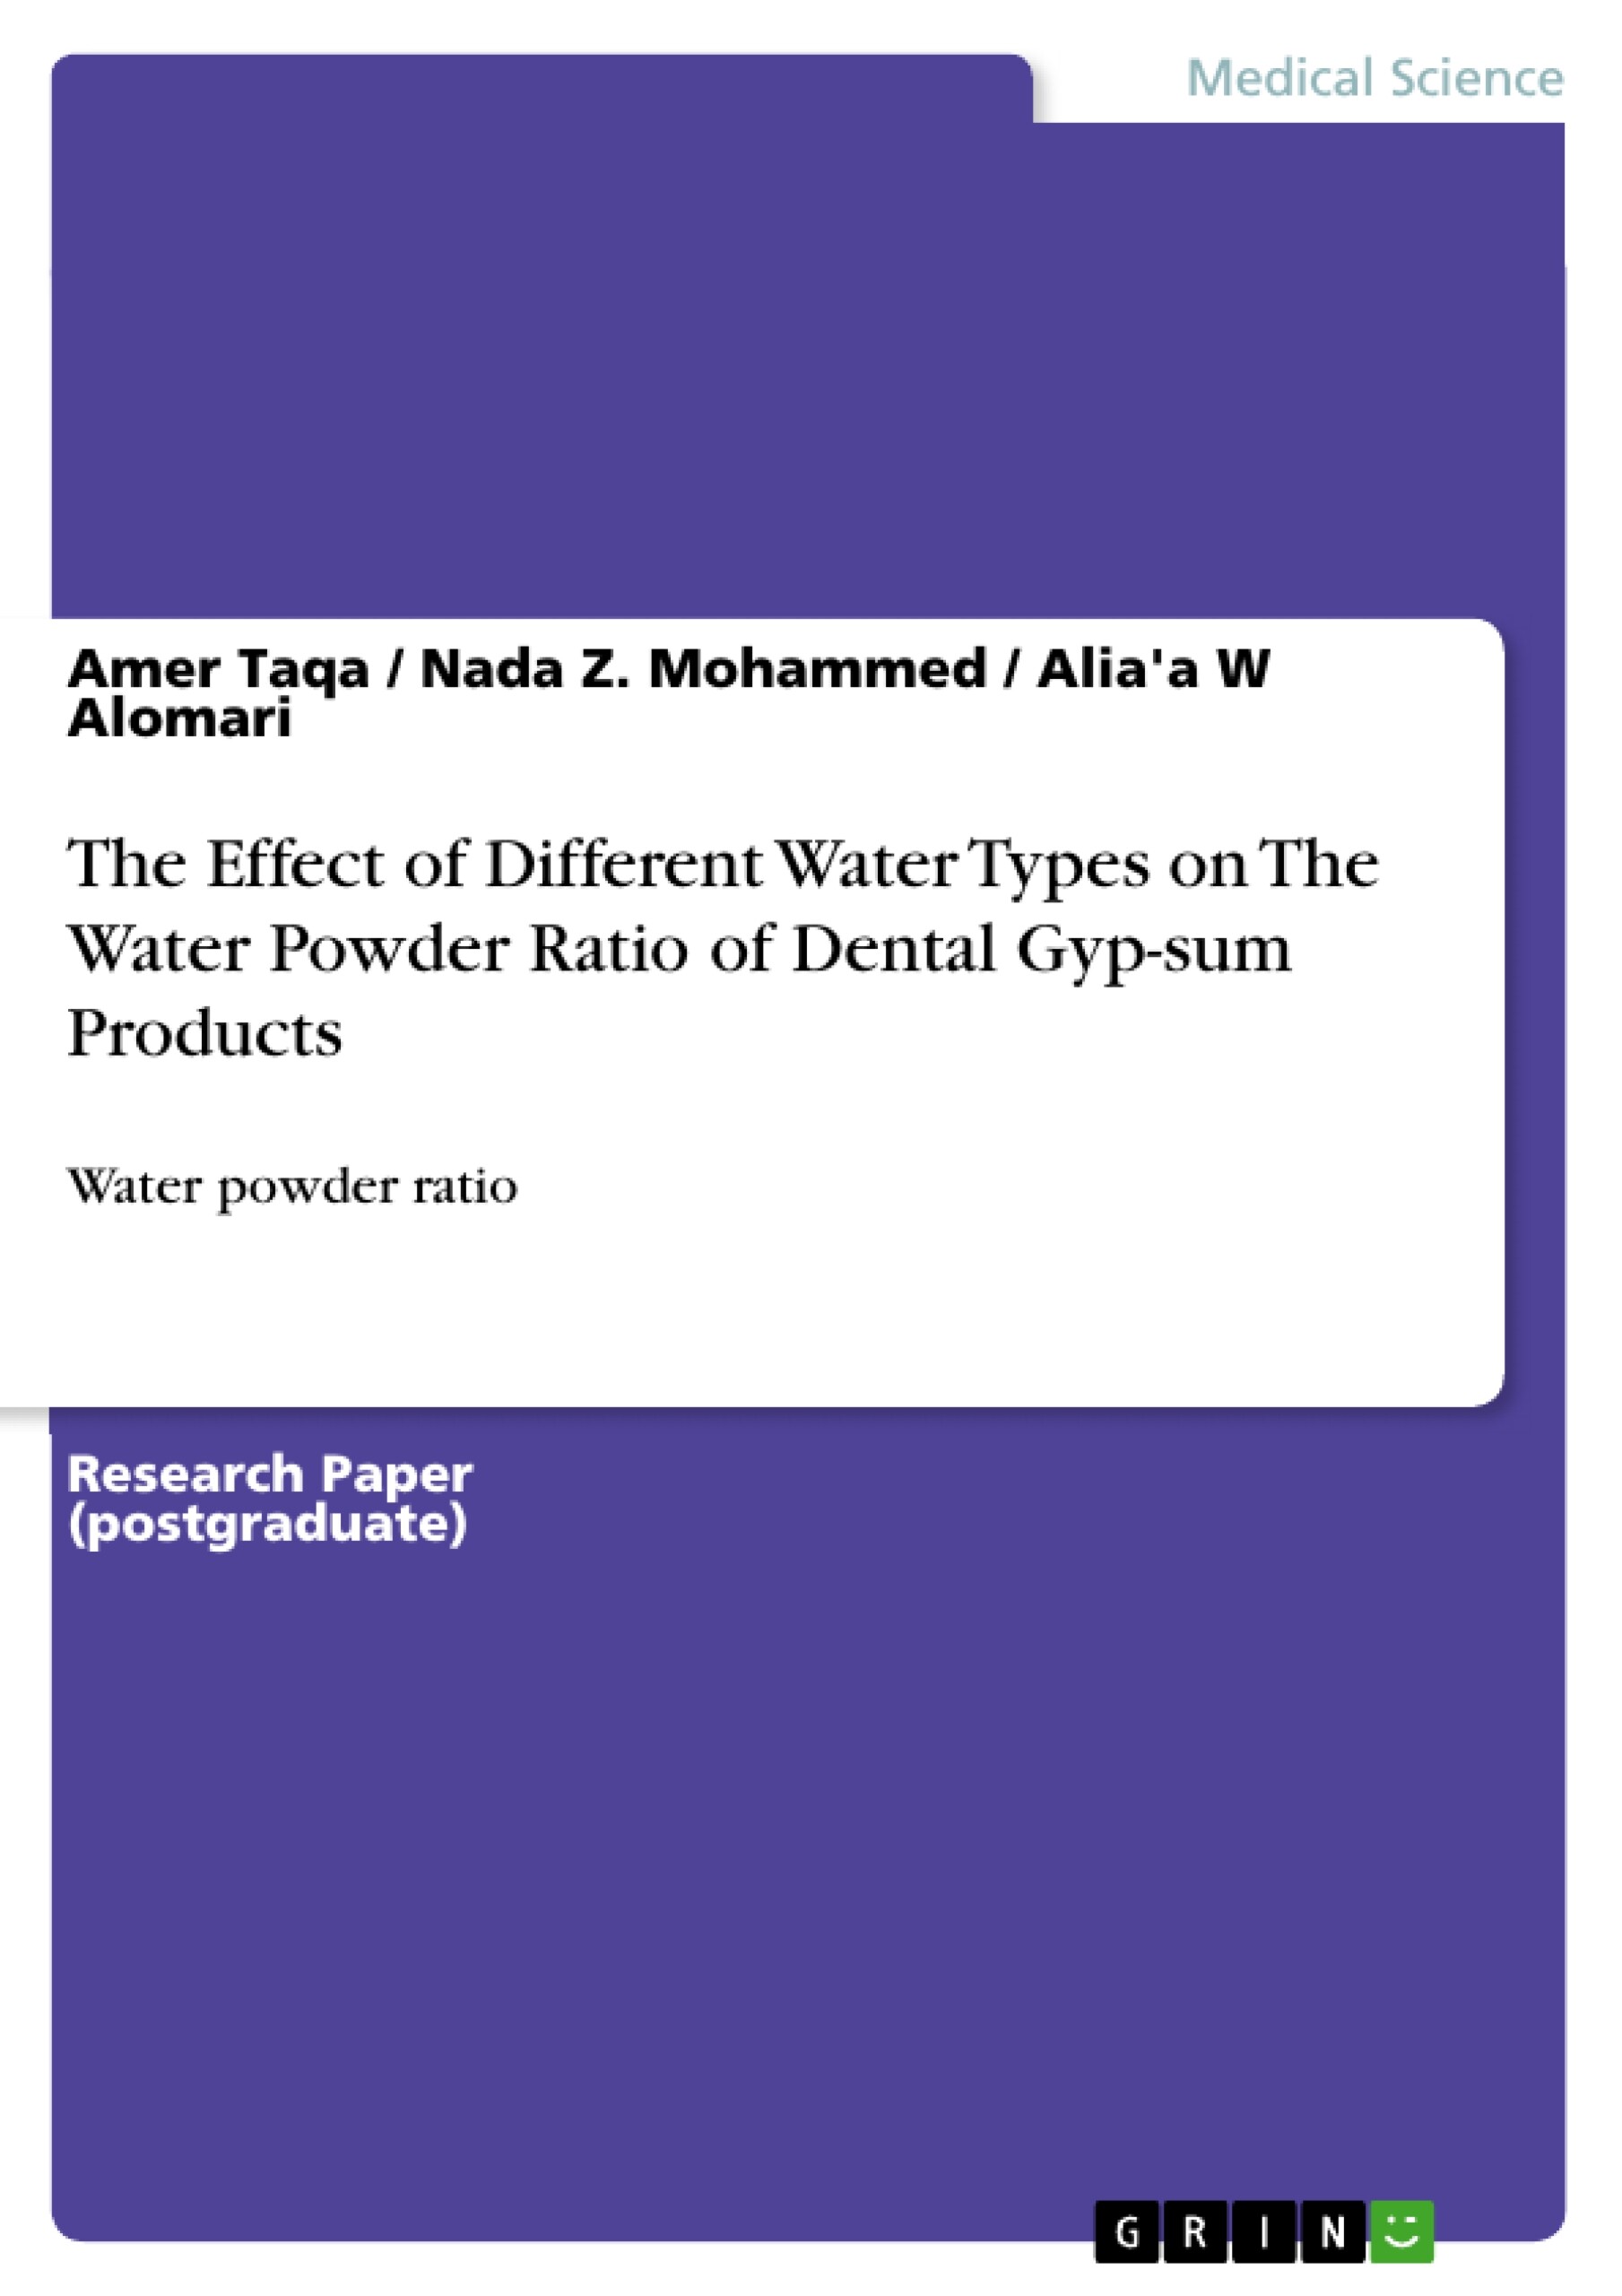 The Effect of Different Water Types on The Water Powder Ratio of Dental Gyp-sum Products